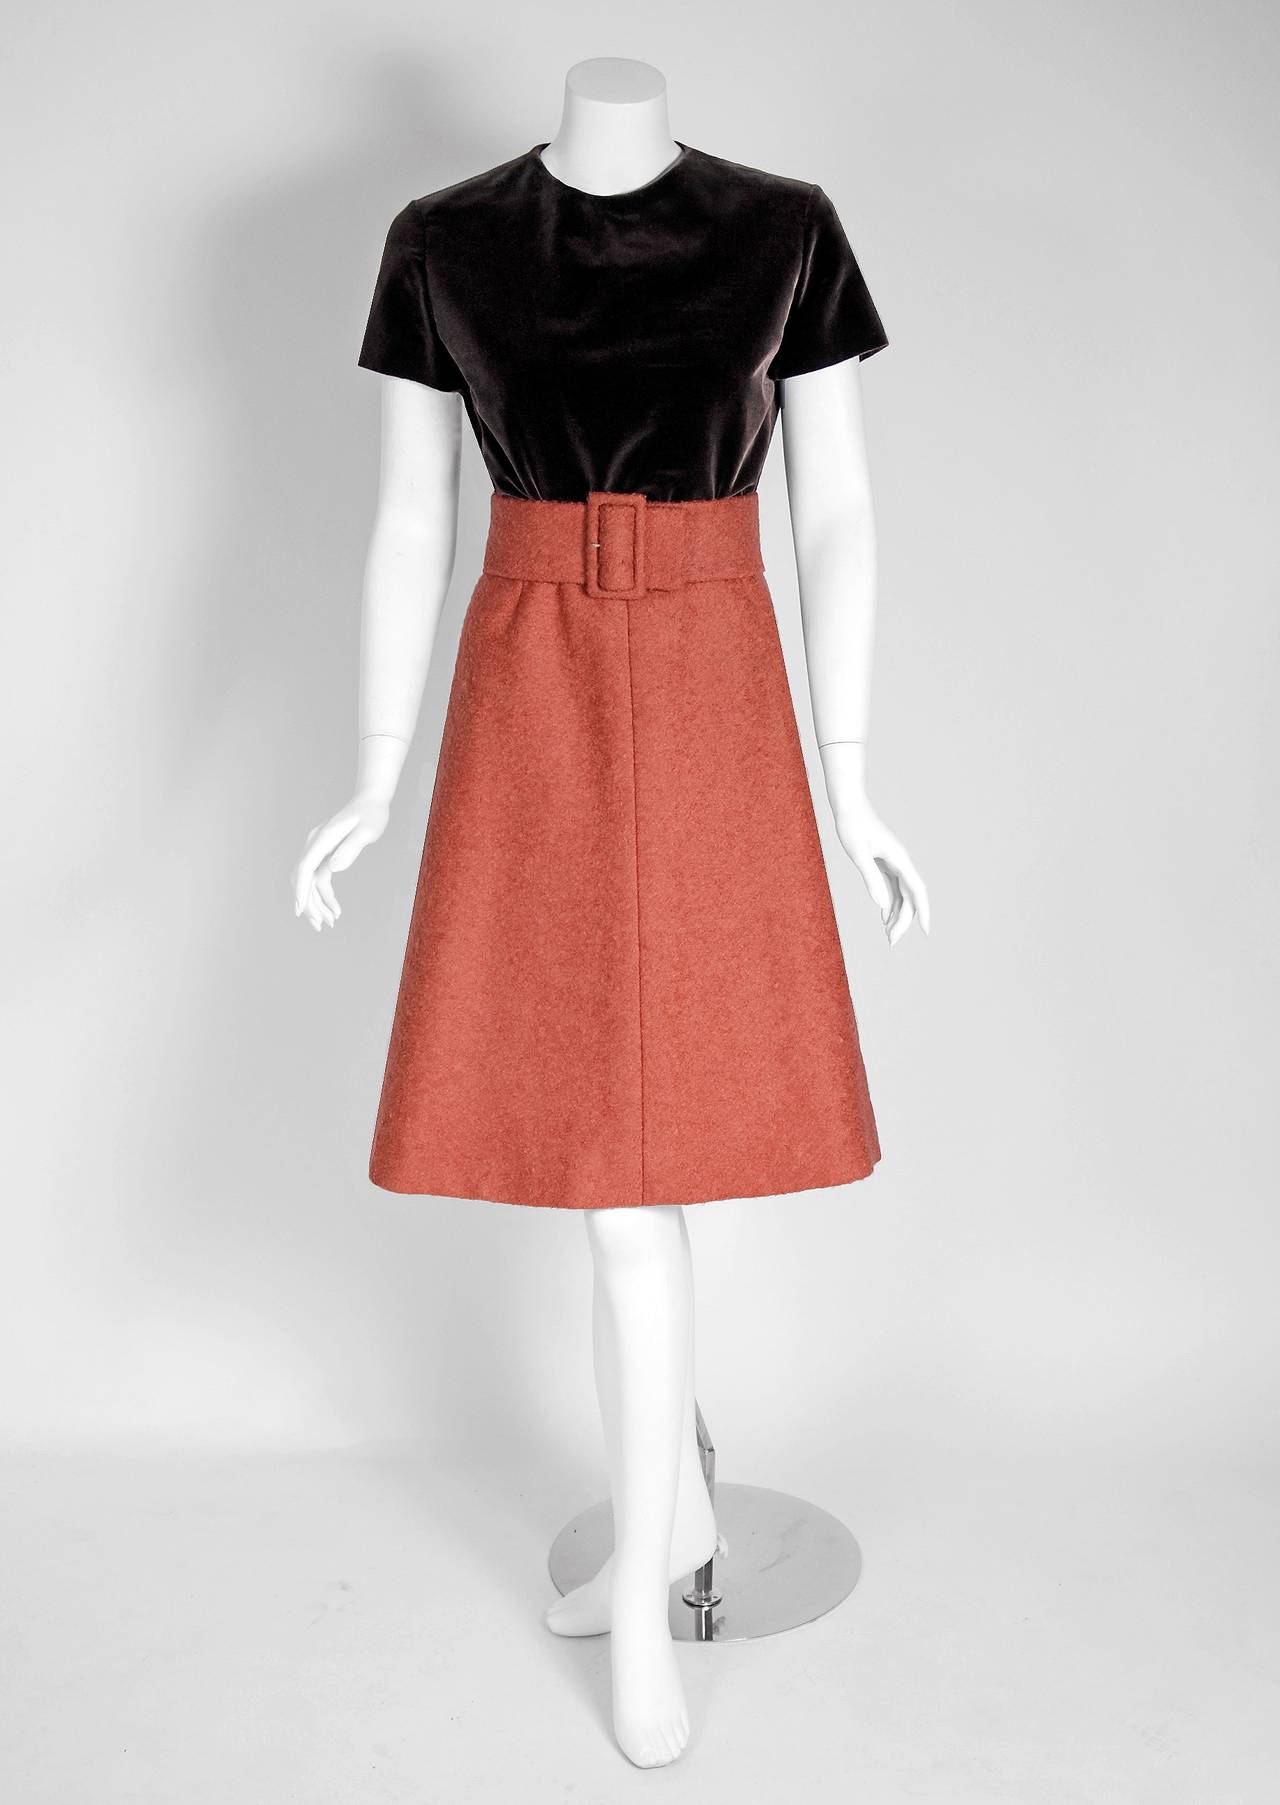 Women's 1960 Christian Dior Demi-Couture Documented Apricot Wool Belted Dress Ensemble